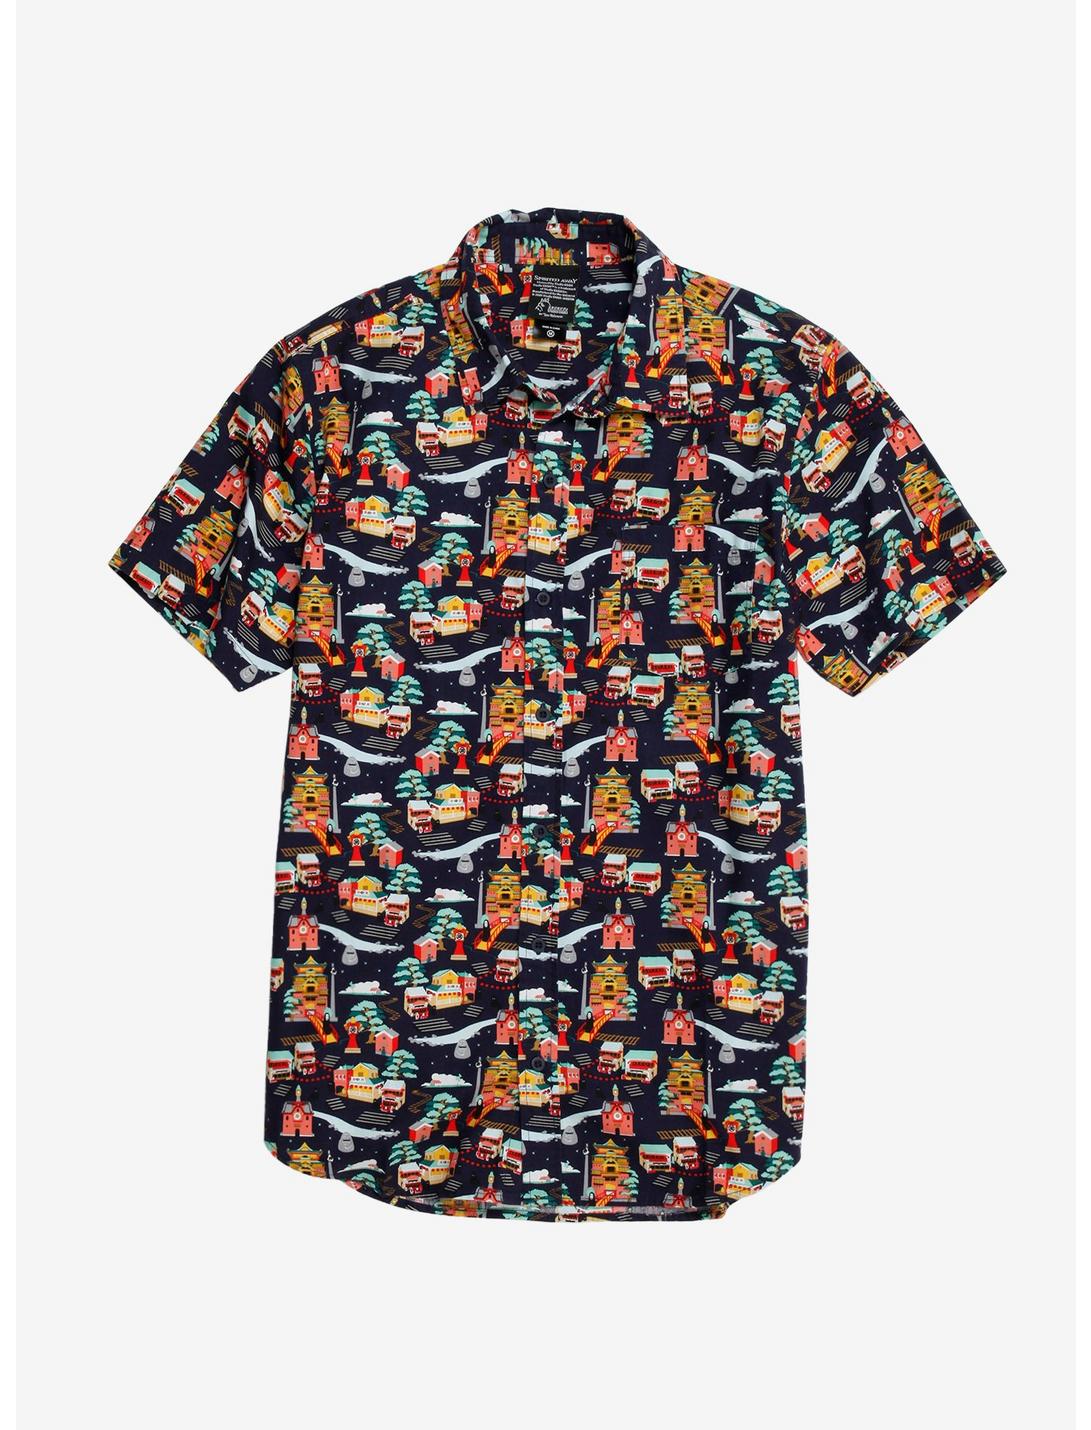 Our Universe Studio Ghibli Spirited Away Landmarks Woven Button-Up - BoxLunch Exclusive, MULTI, hi-res